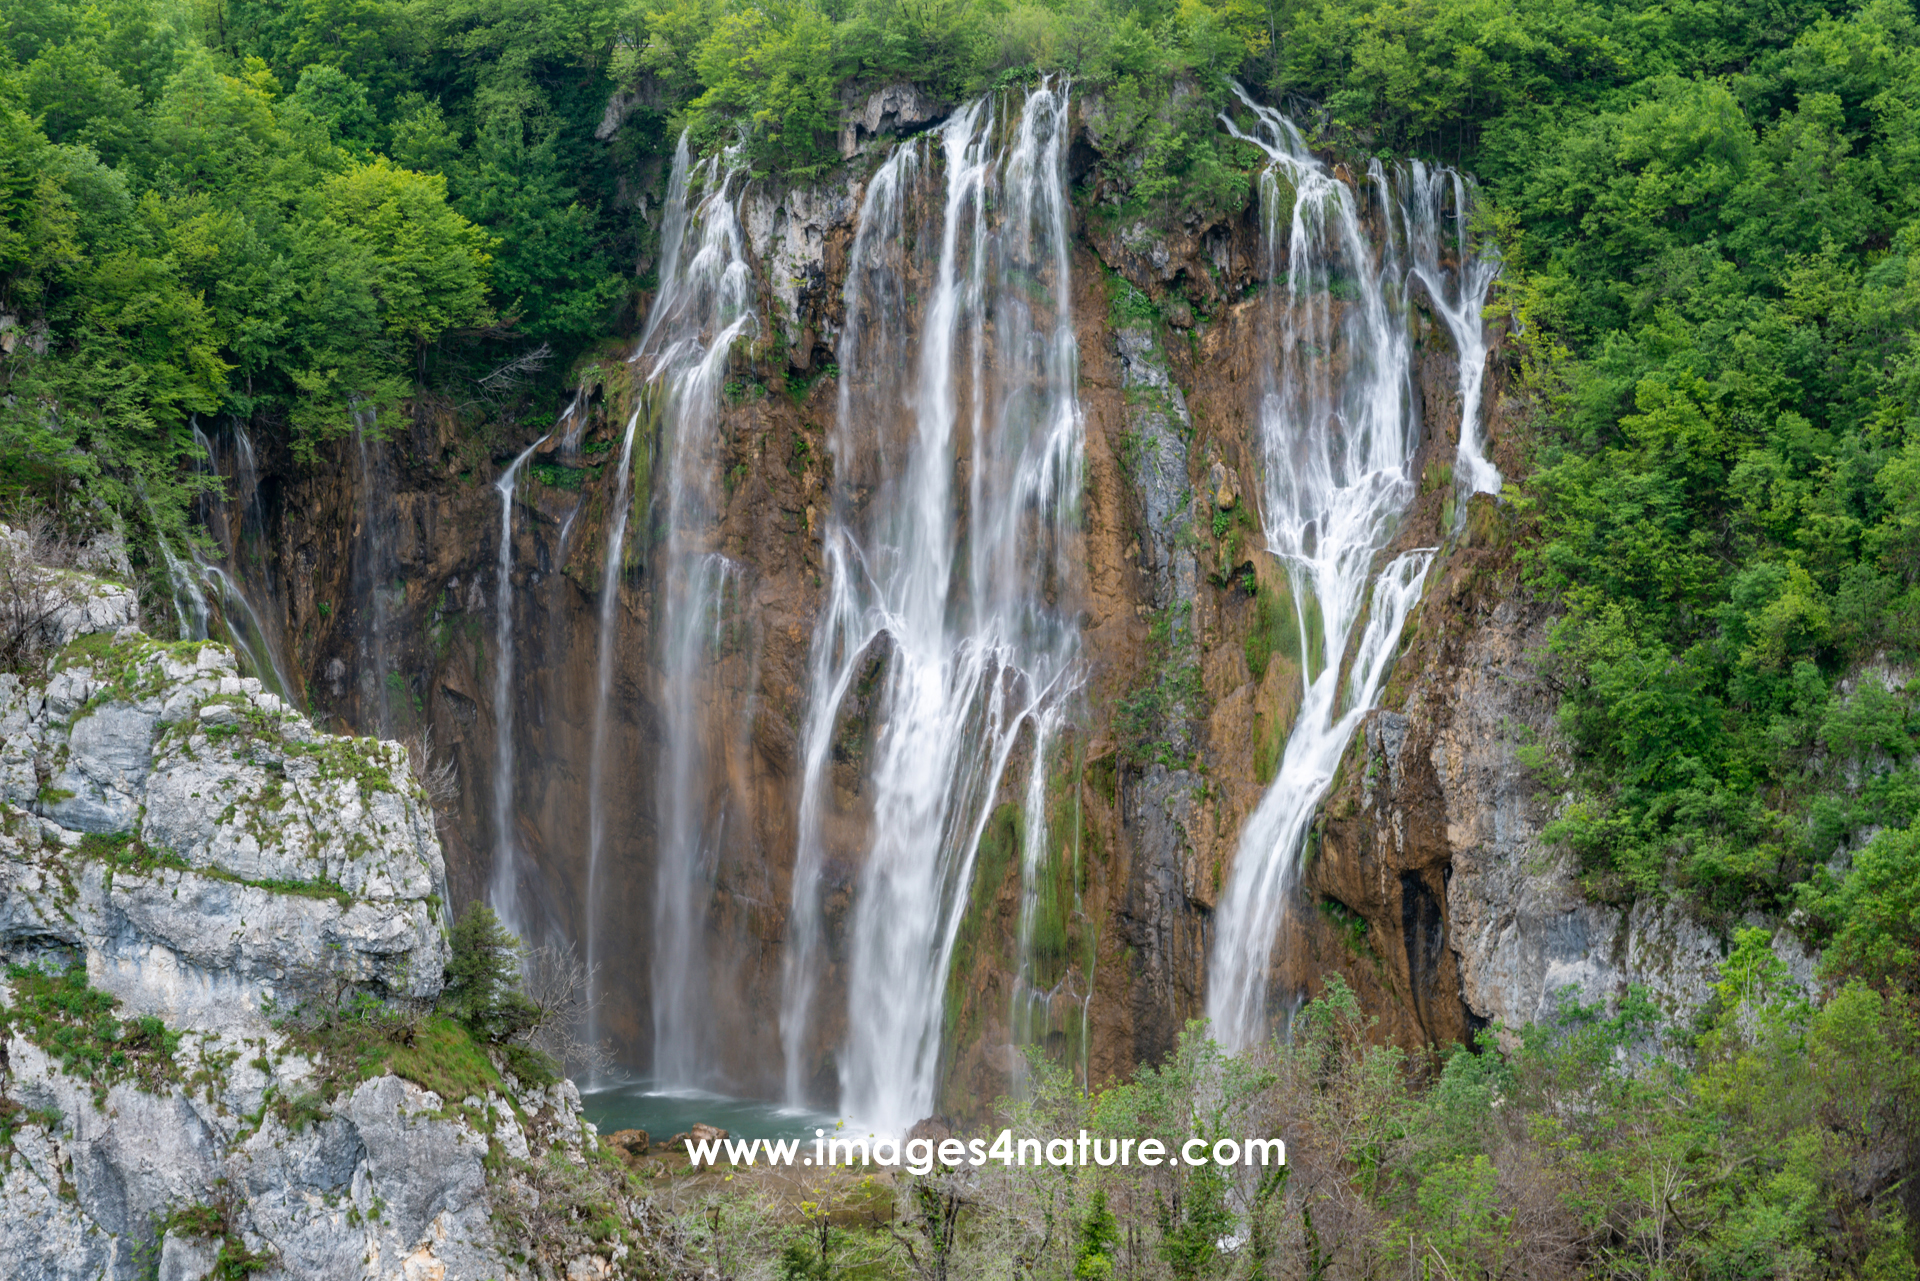 Large scenic Plitvice waterfall dropping into the valley from tree-covered rocks